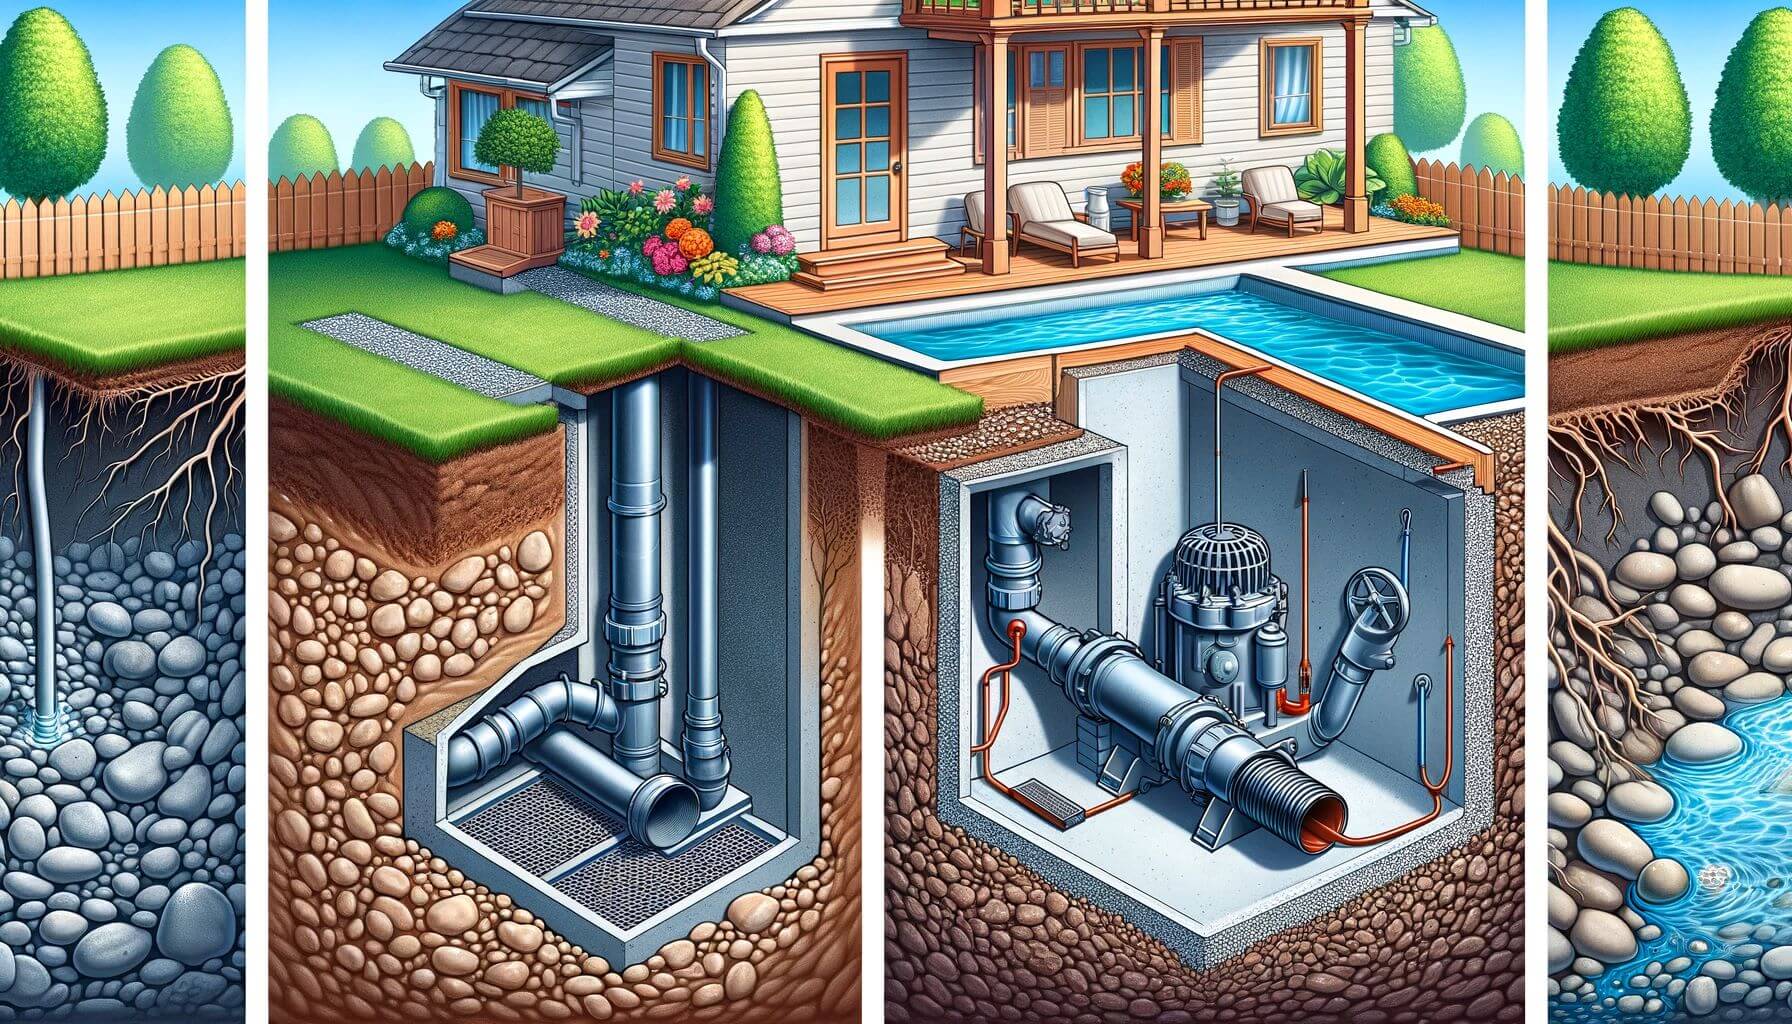 Comparison between a French Drain and a Sump Pump in a residential setting